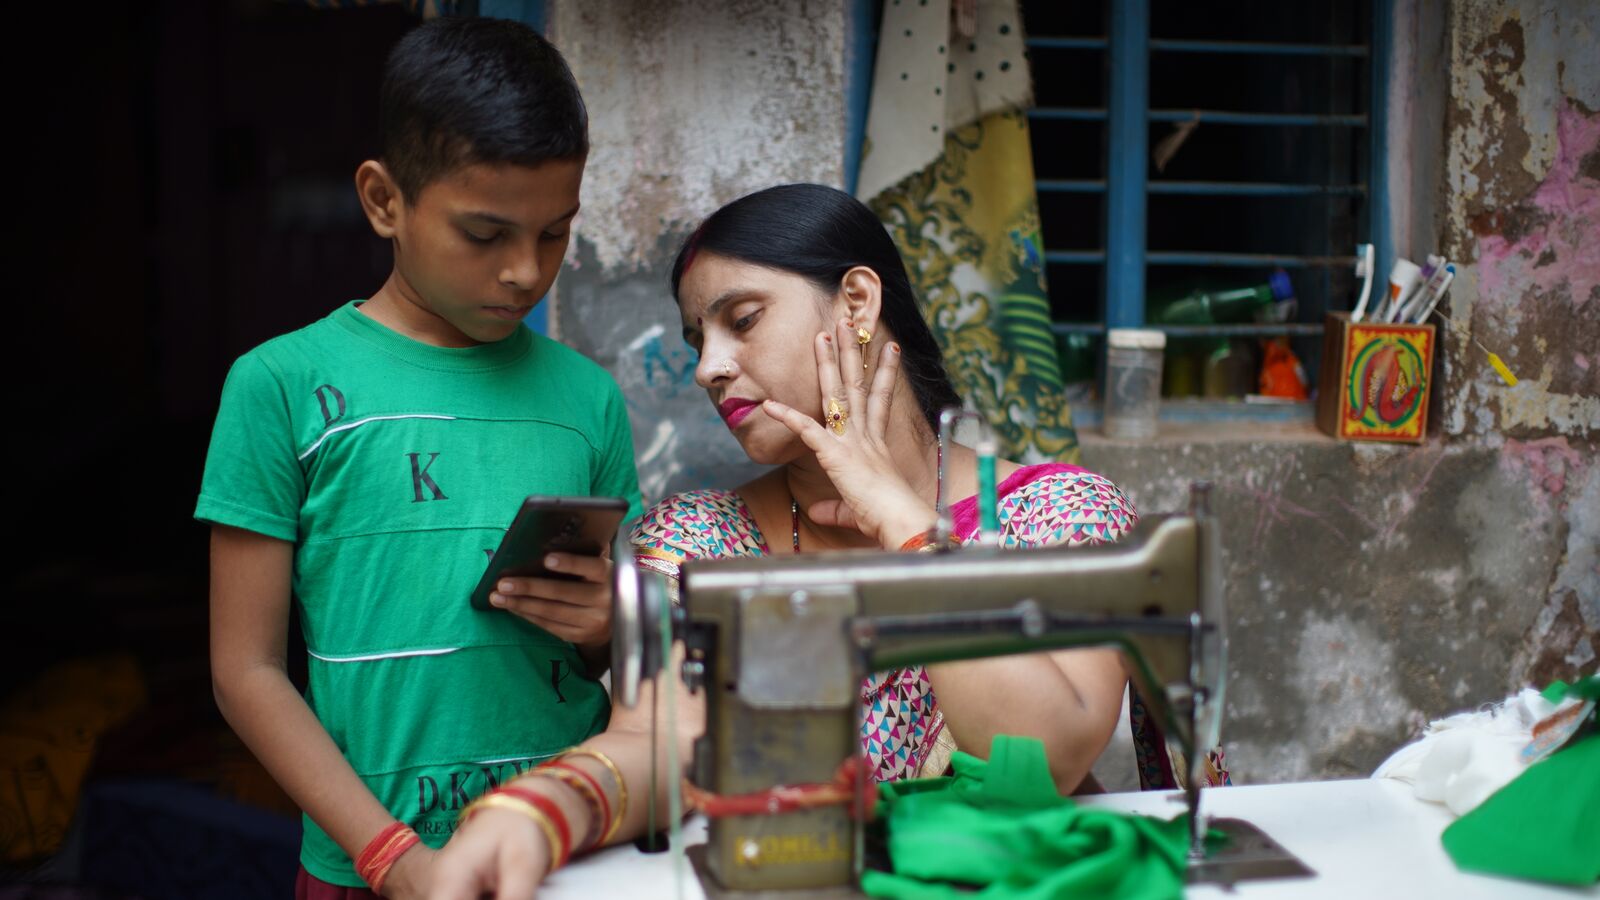 A mother in India helps her son access ConveGenius technology on his device.